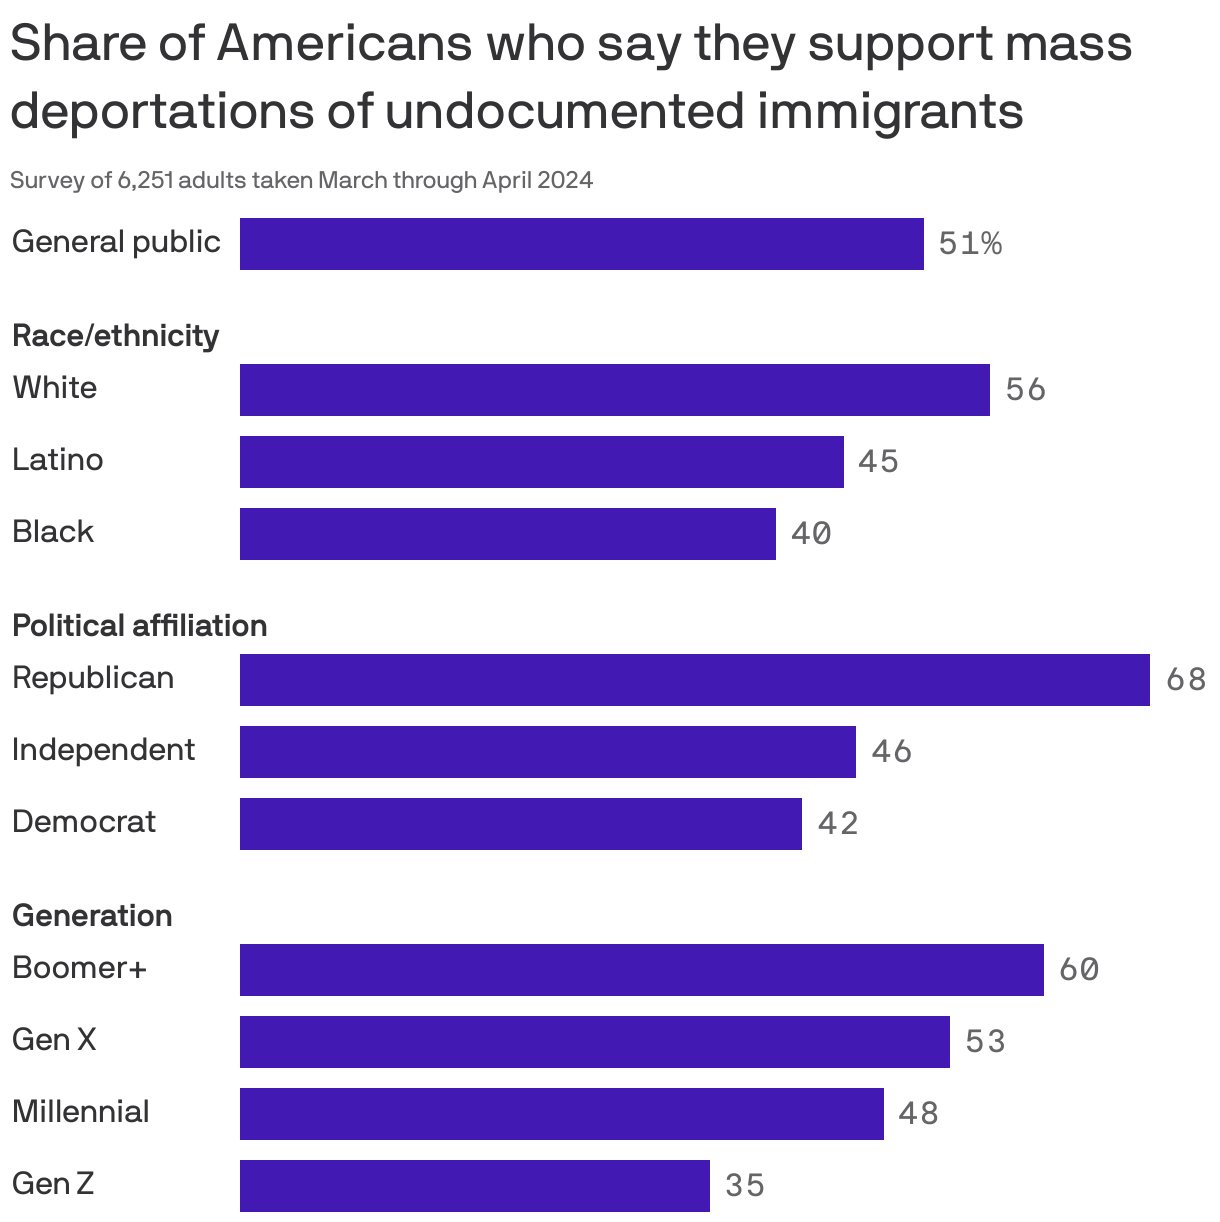 Share of Americans who say they support mass deportations of undocumented immigrants